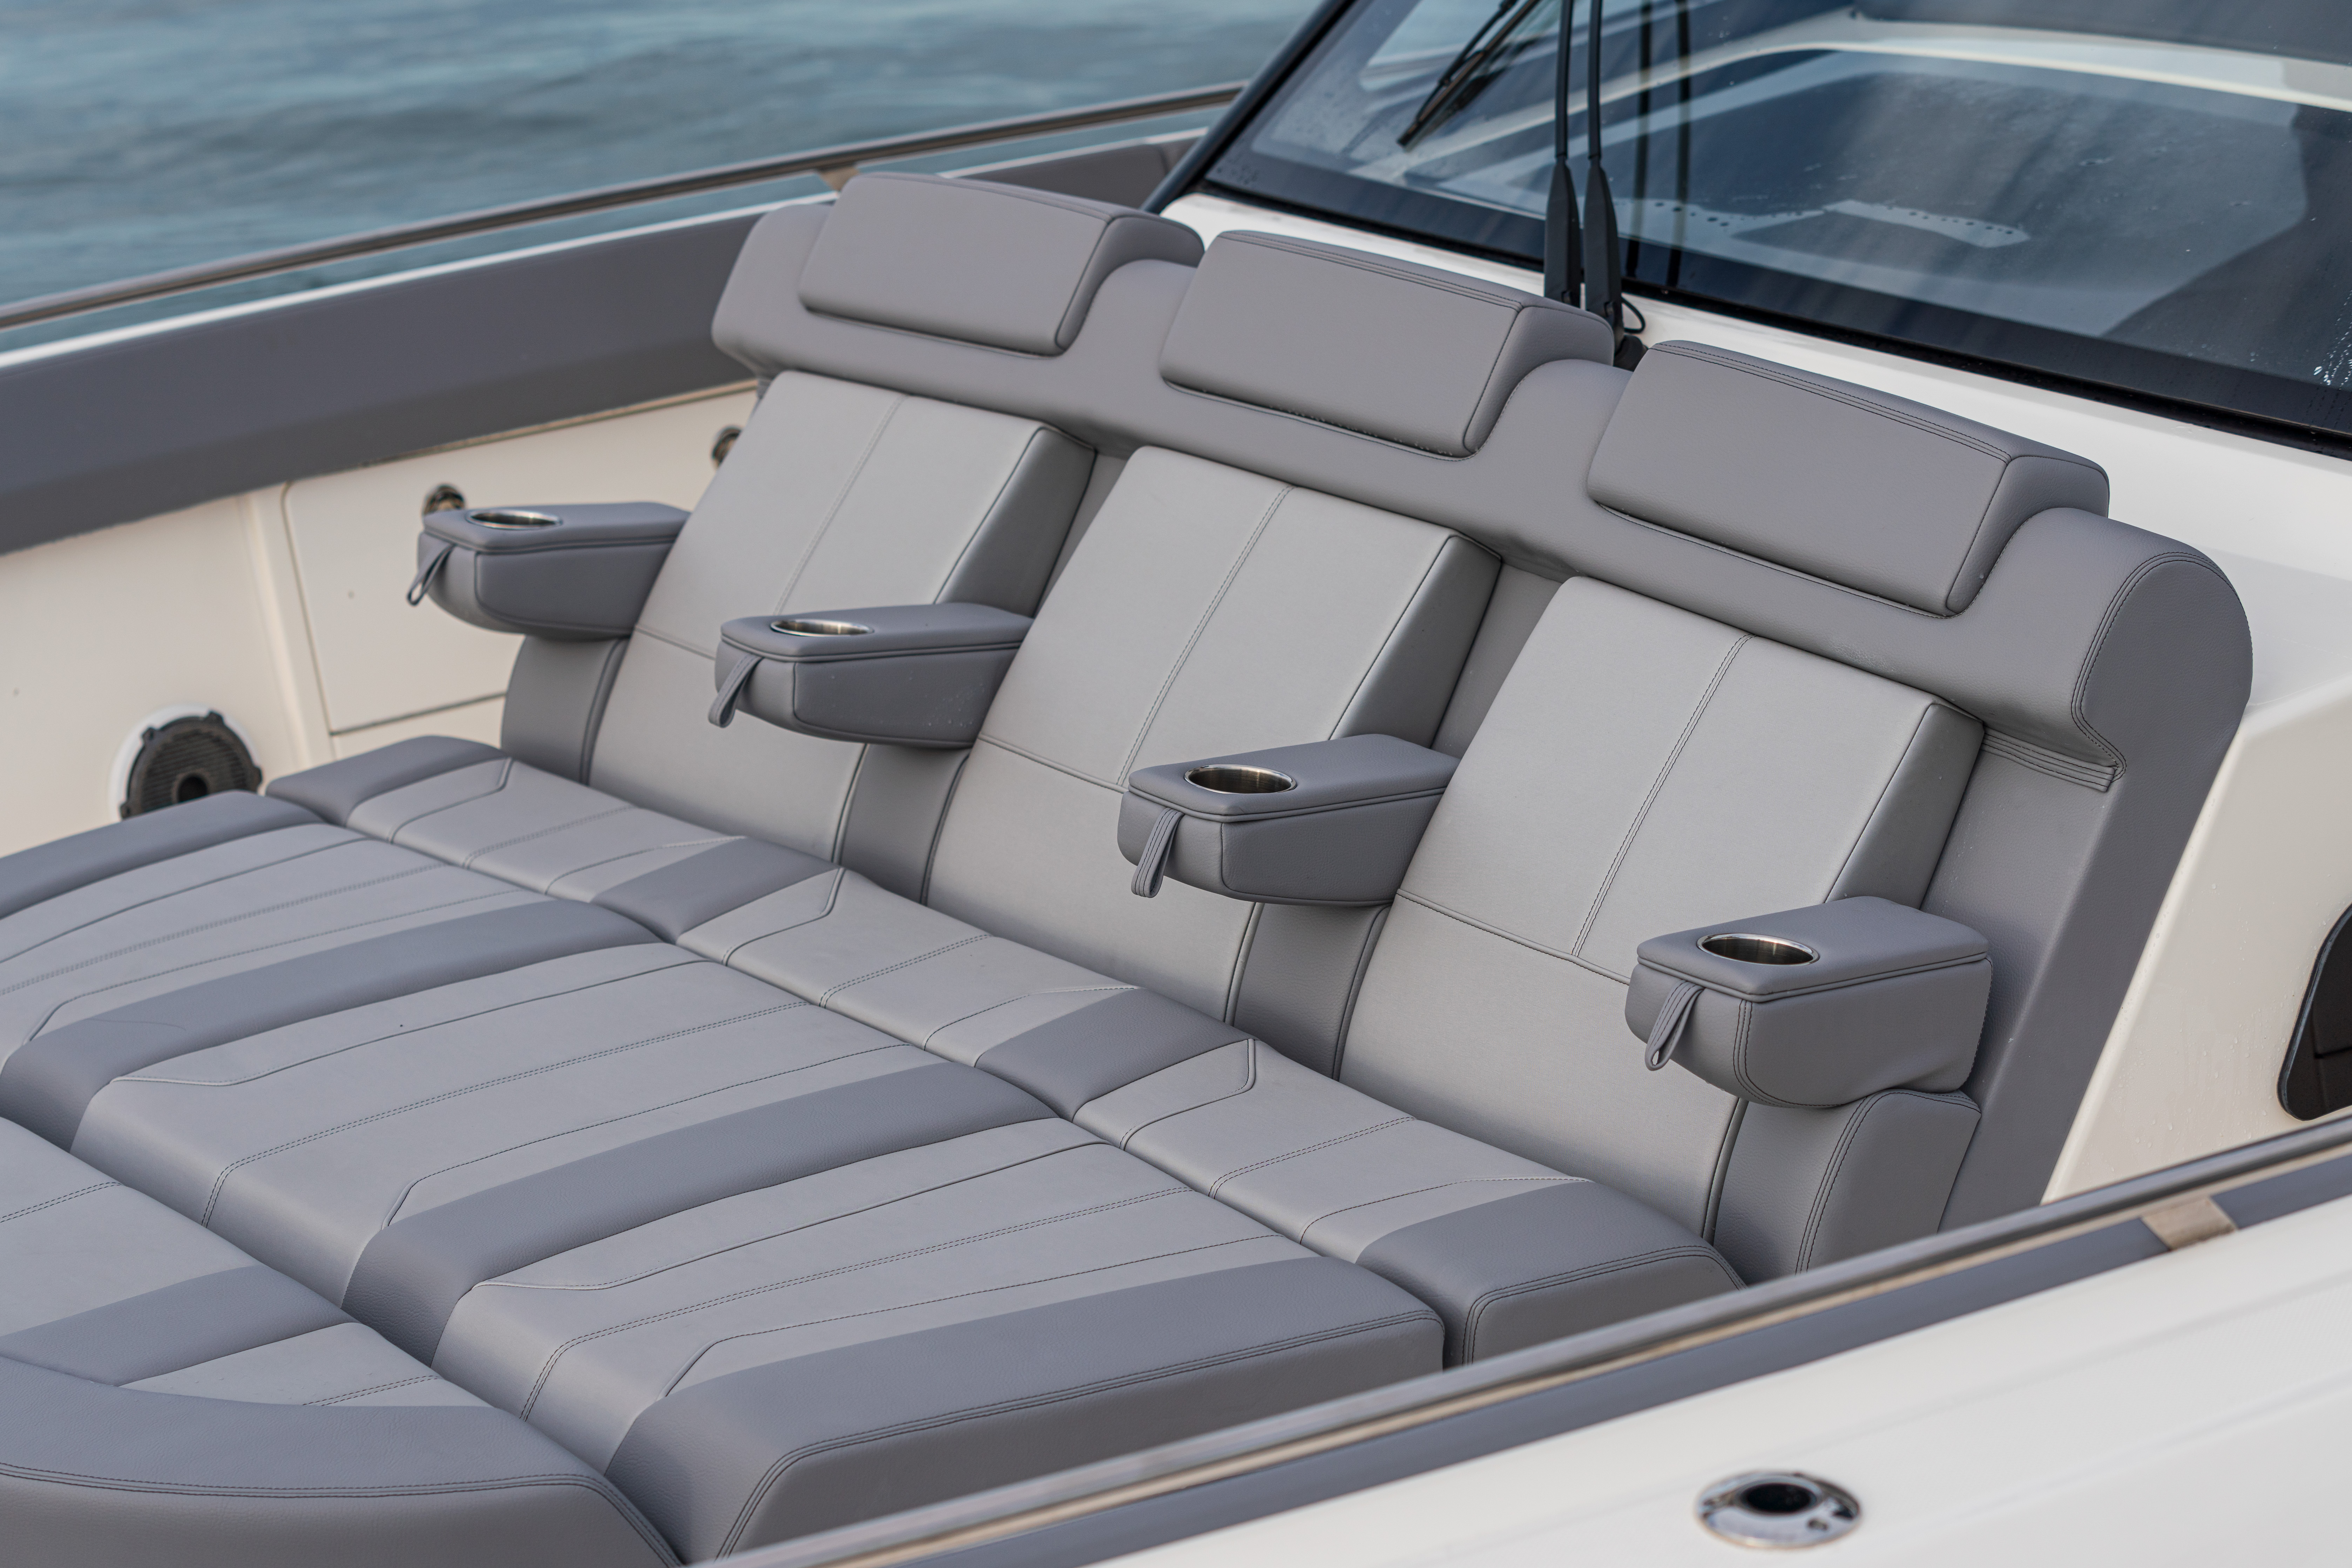 Sea (Gray) Exterior Upholstery Package